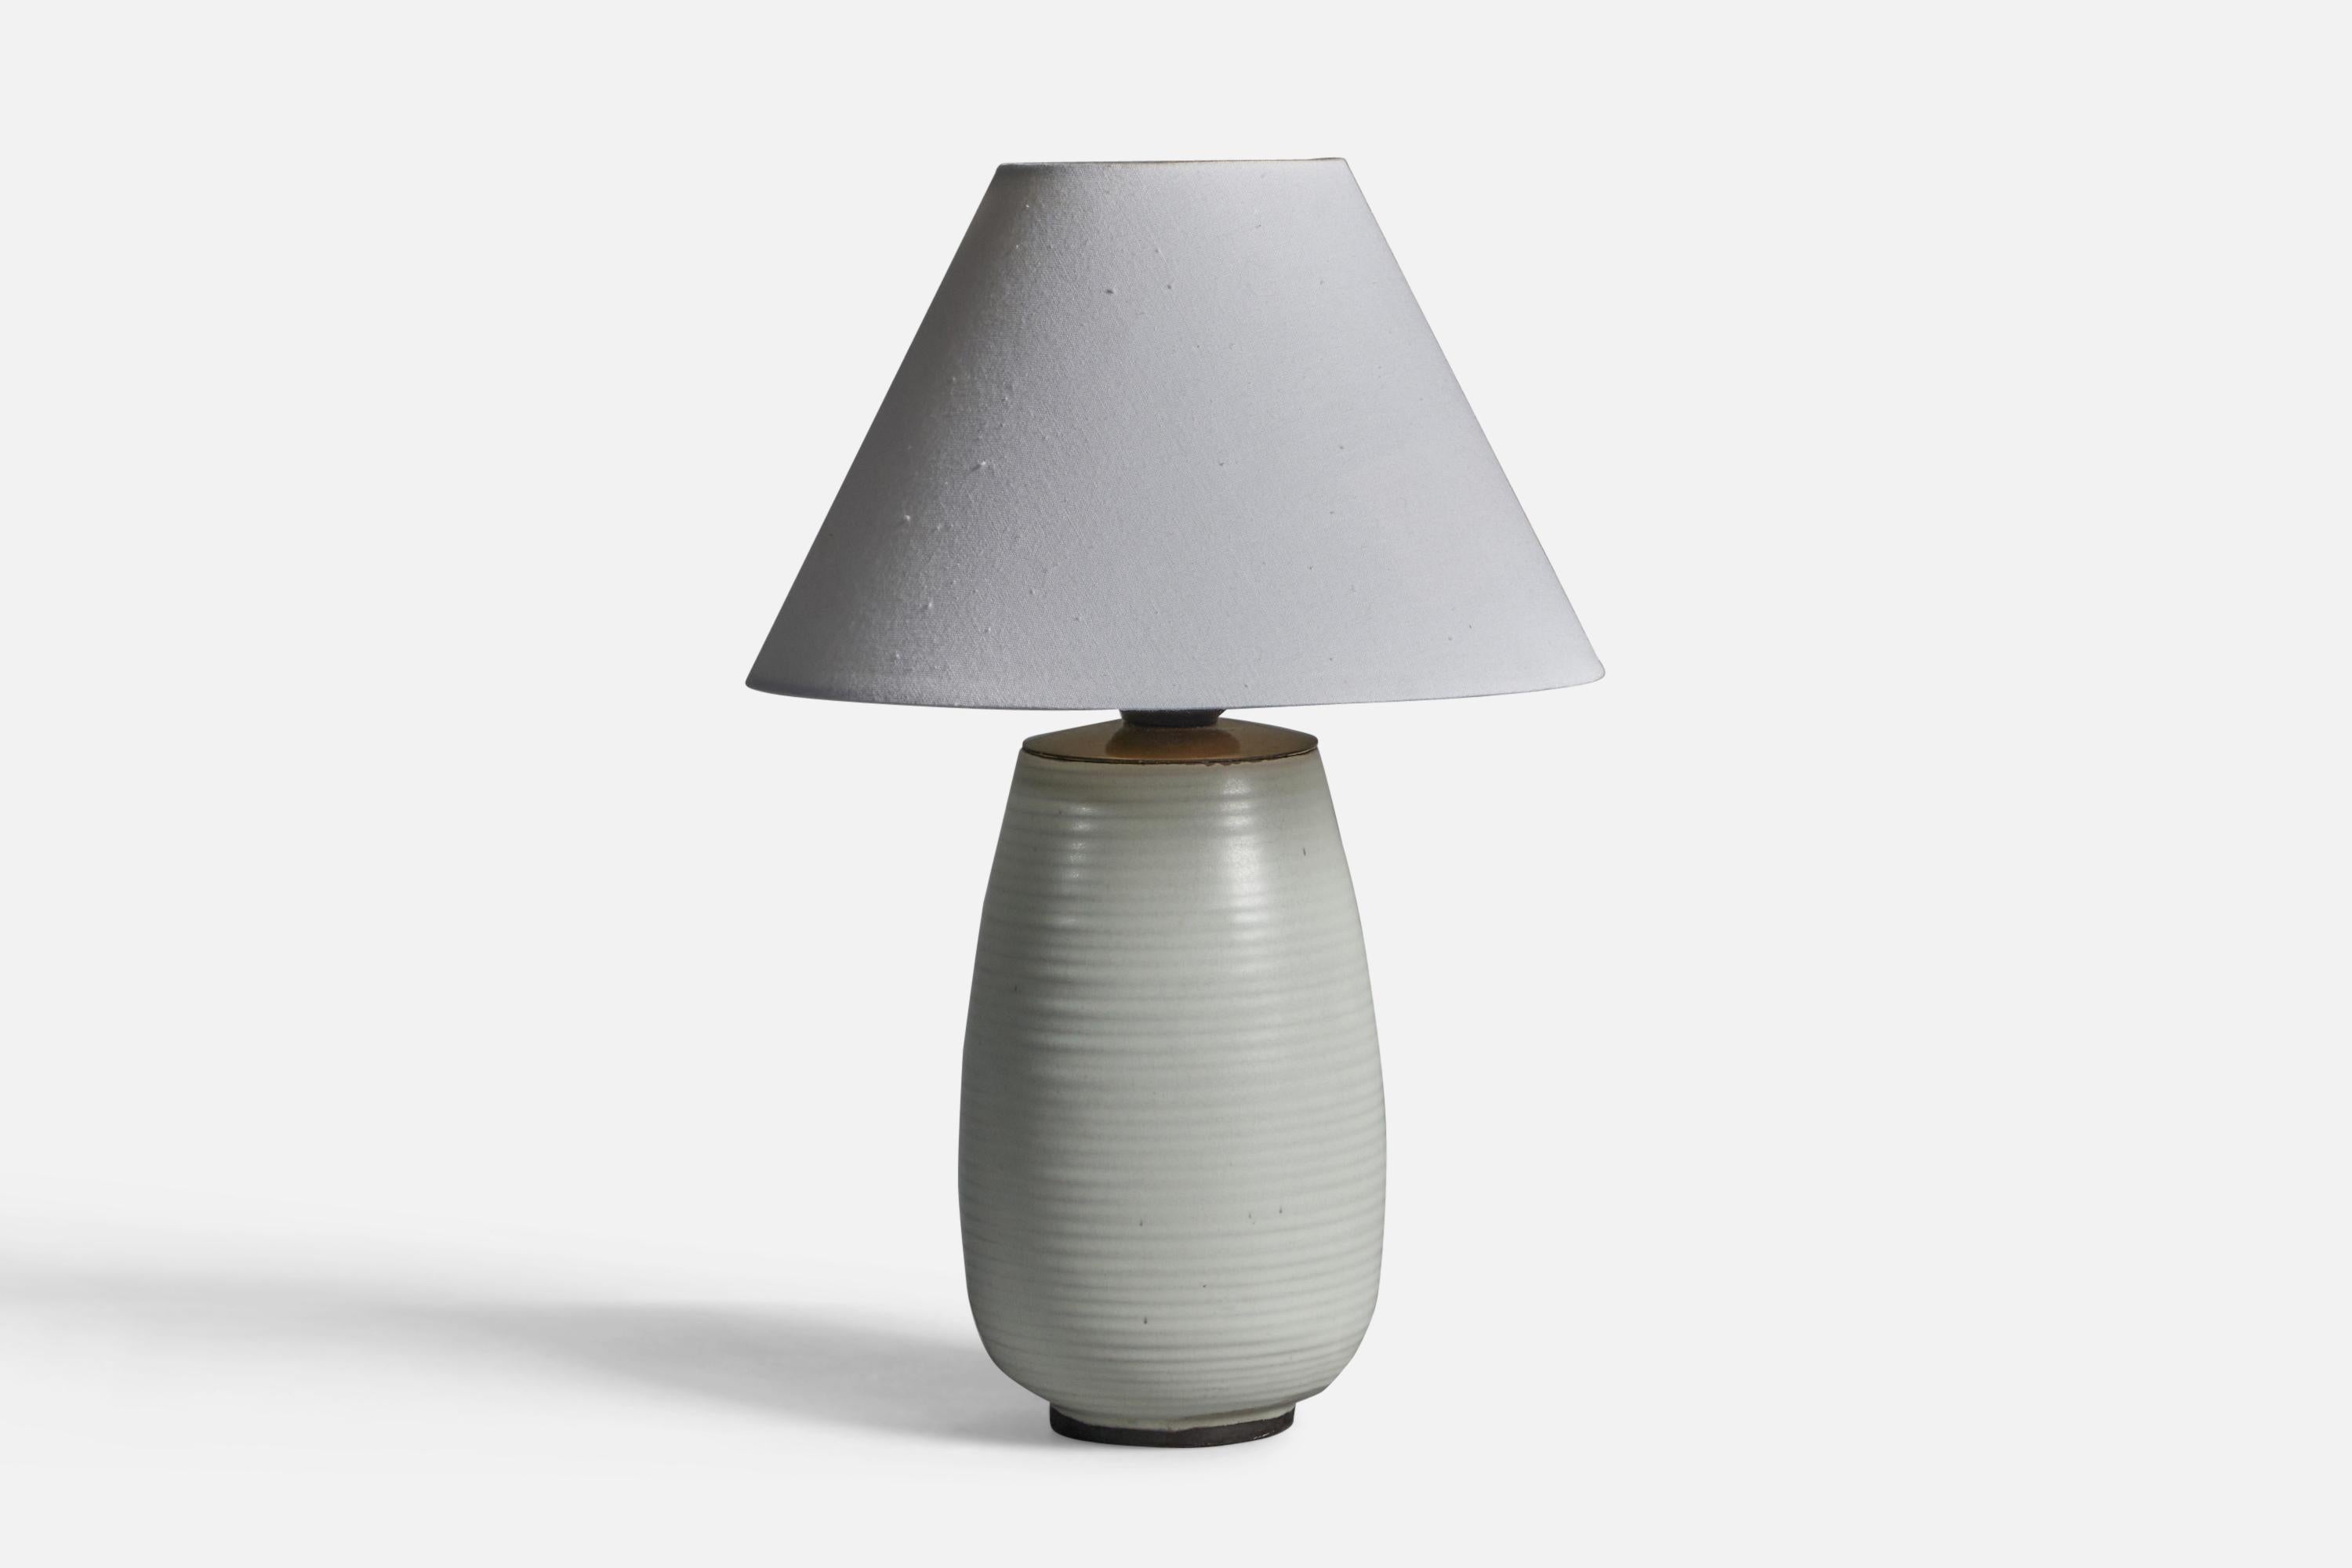 A white-glazed earthenware and brass table lamp, designed and produced by Upsala Ekeby, Sweden, 1940s.

Dimensions of Lamp (inches): 8.75